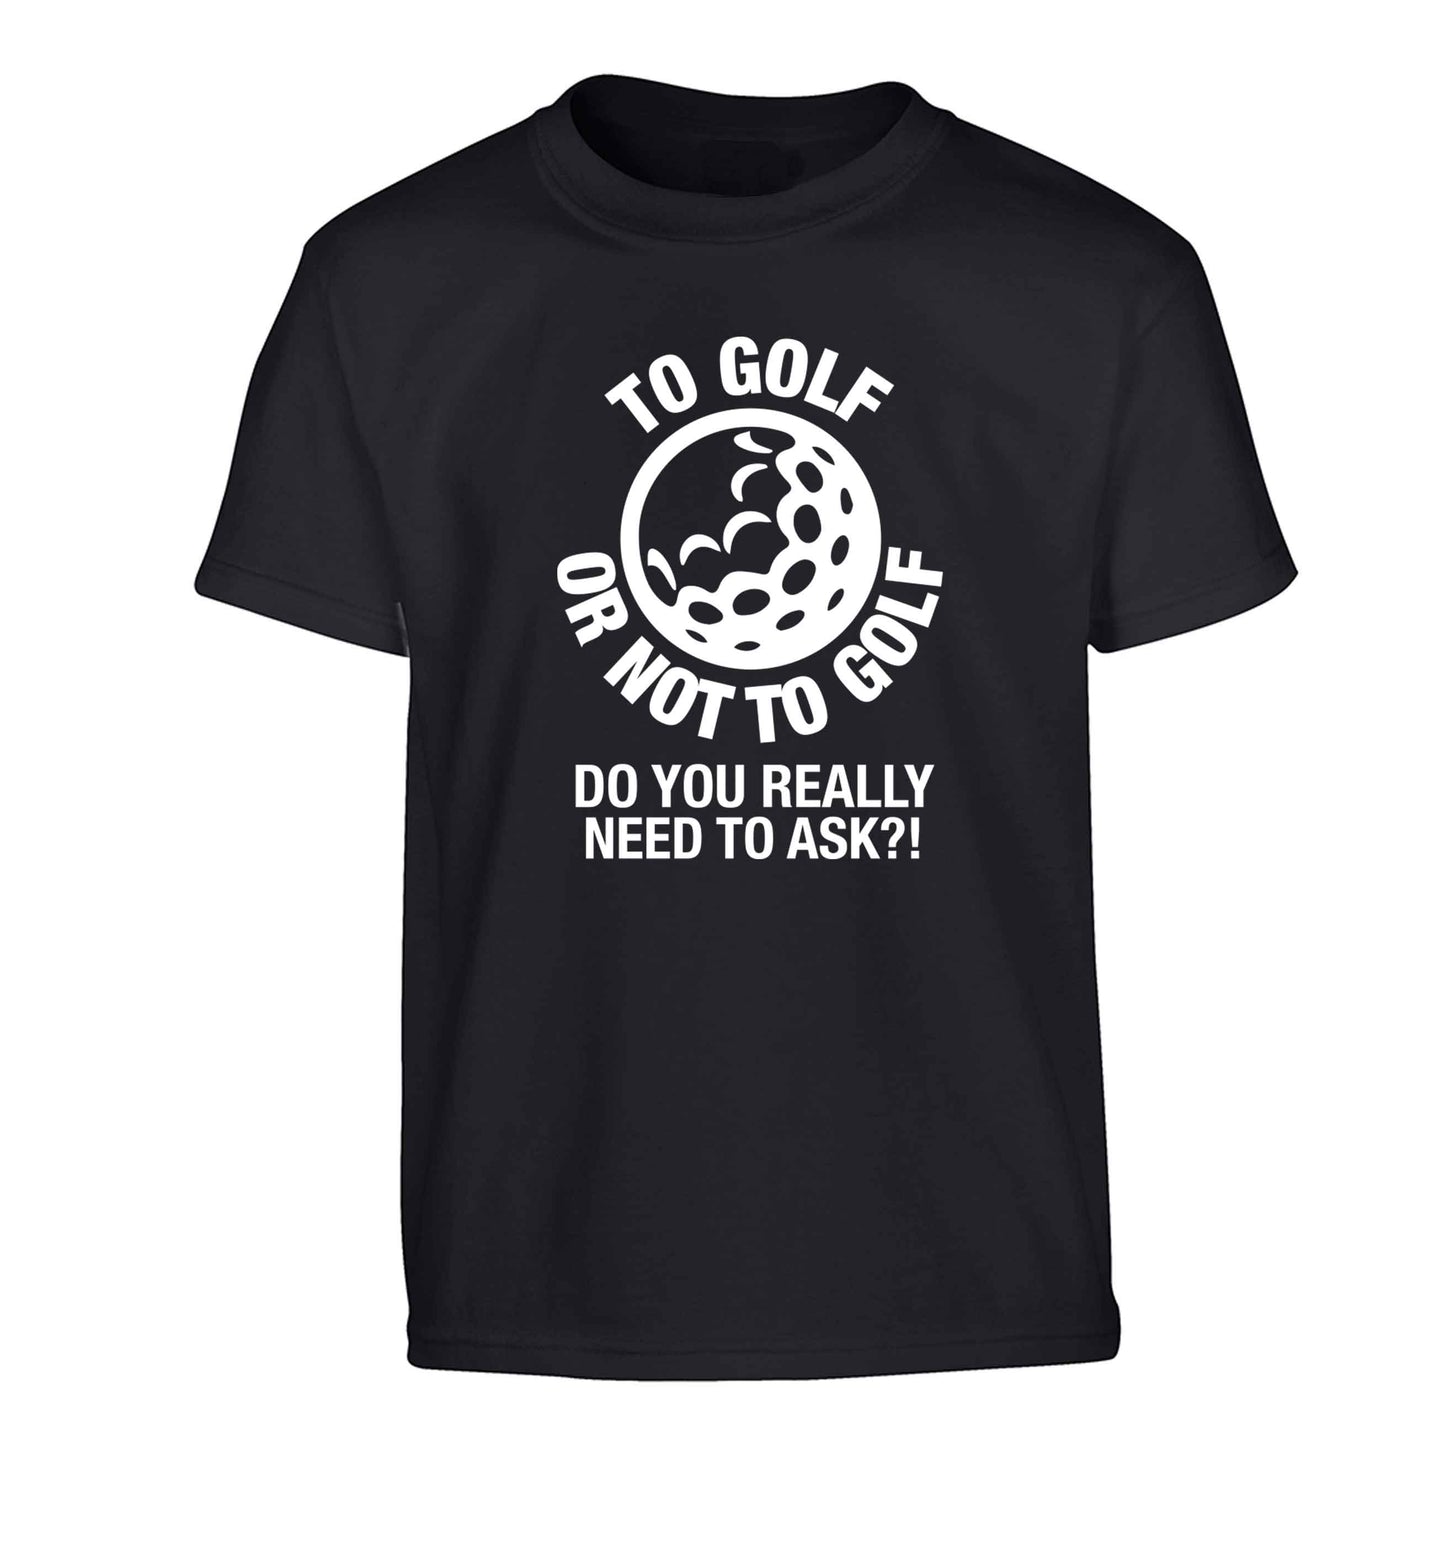 To golf or not to golf Do you really need to ask?! Children's black Tshirt 12-13 Years